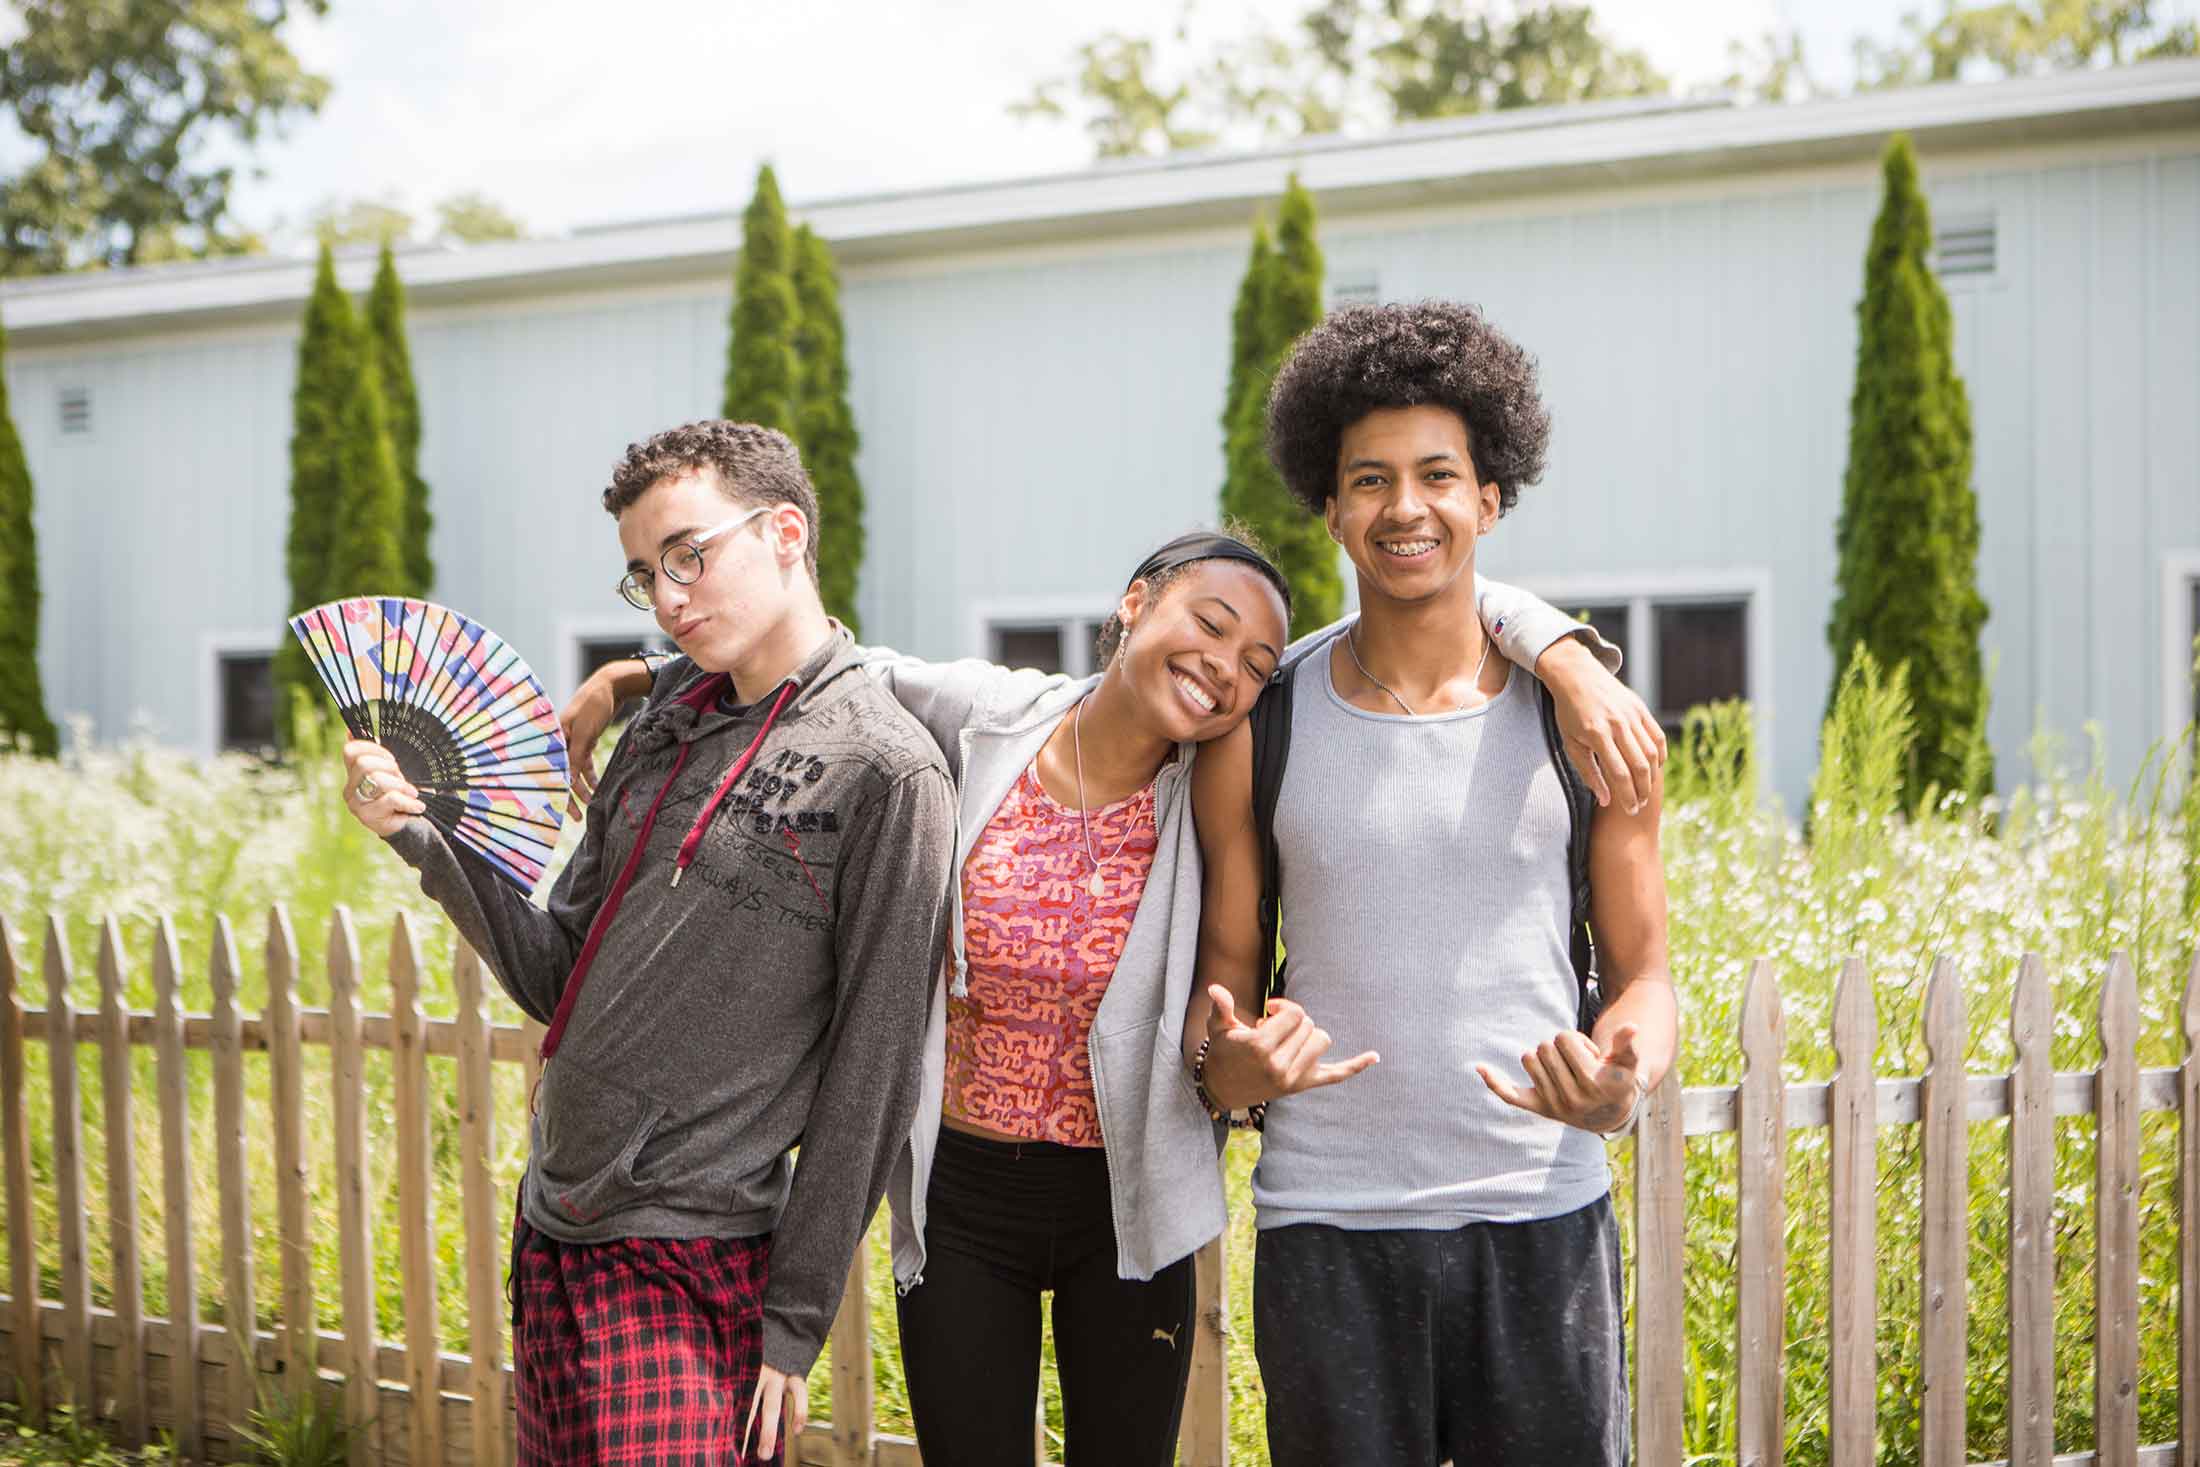 a group of three young people, one holding a colorful fan, smiling while posing for a picture in front of a wood fence with trees and a building in the background